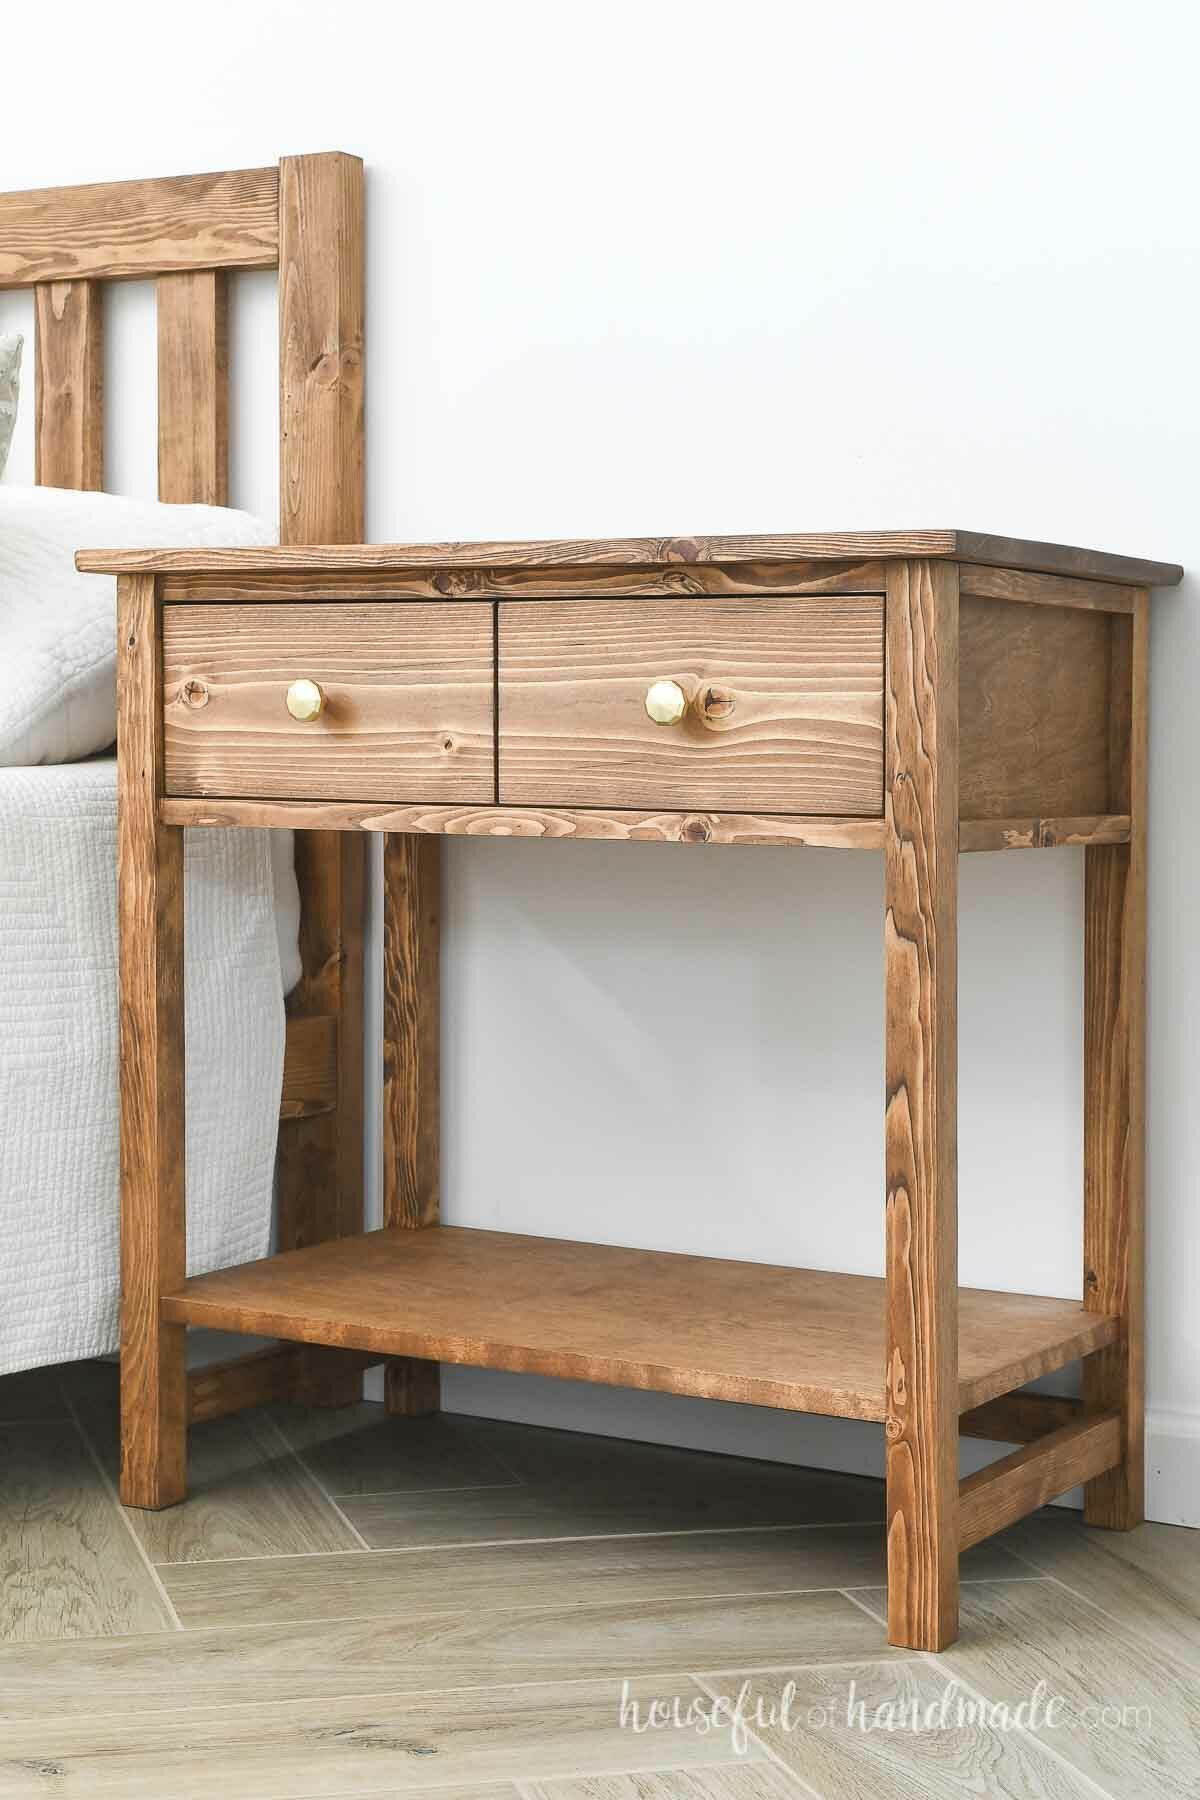 Wood nightstand with a drawer on top that looks like 2 drawers and an open shelf.